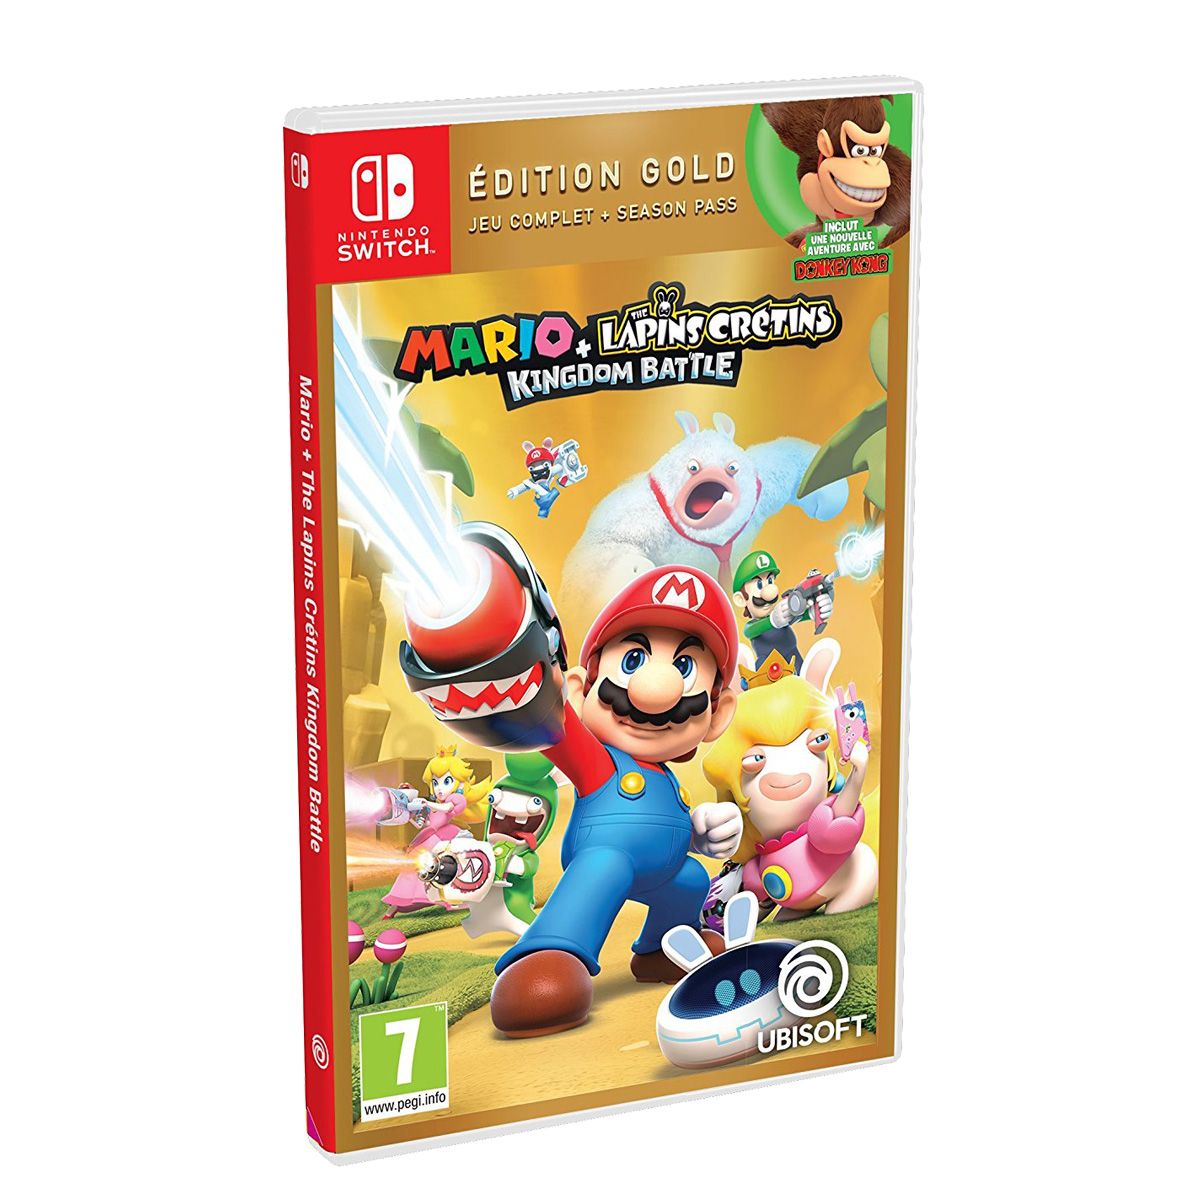 Mario + The Lapin Crétins Kingdom Battle Edition Gold Nintendo Switch